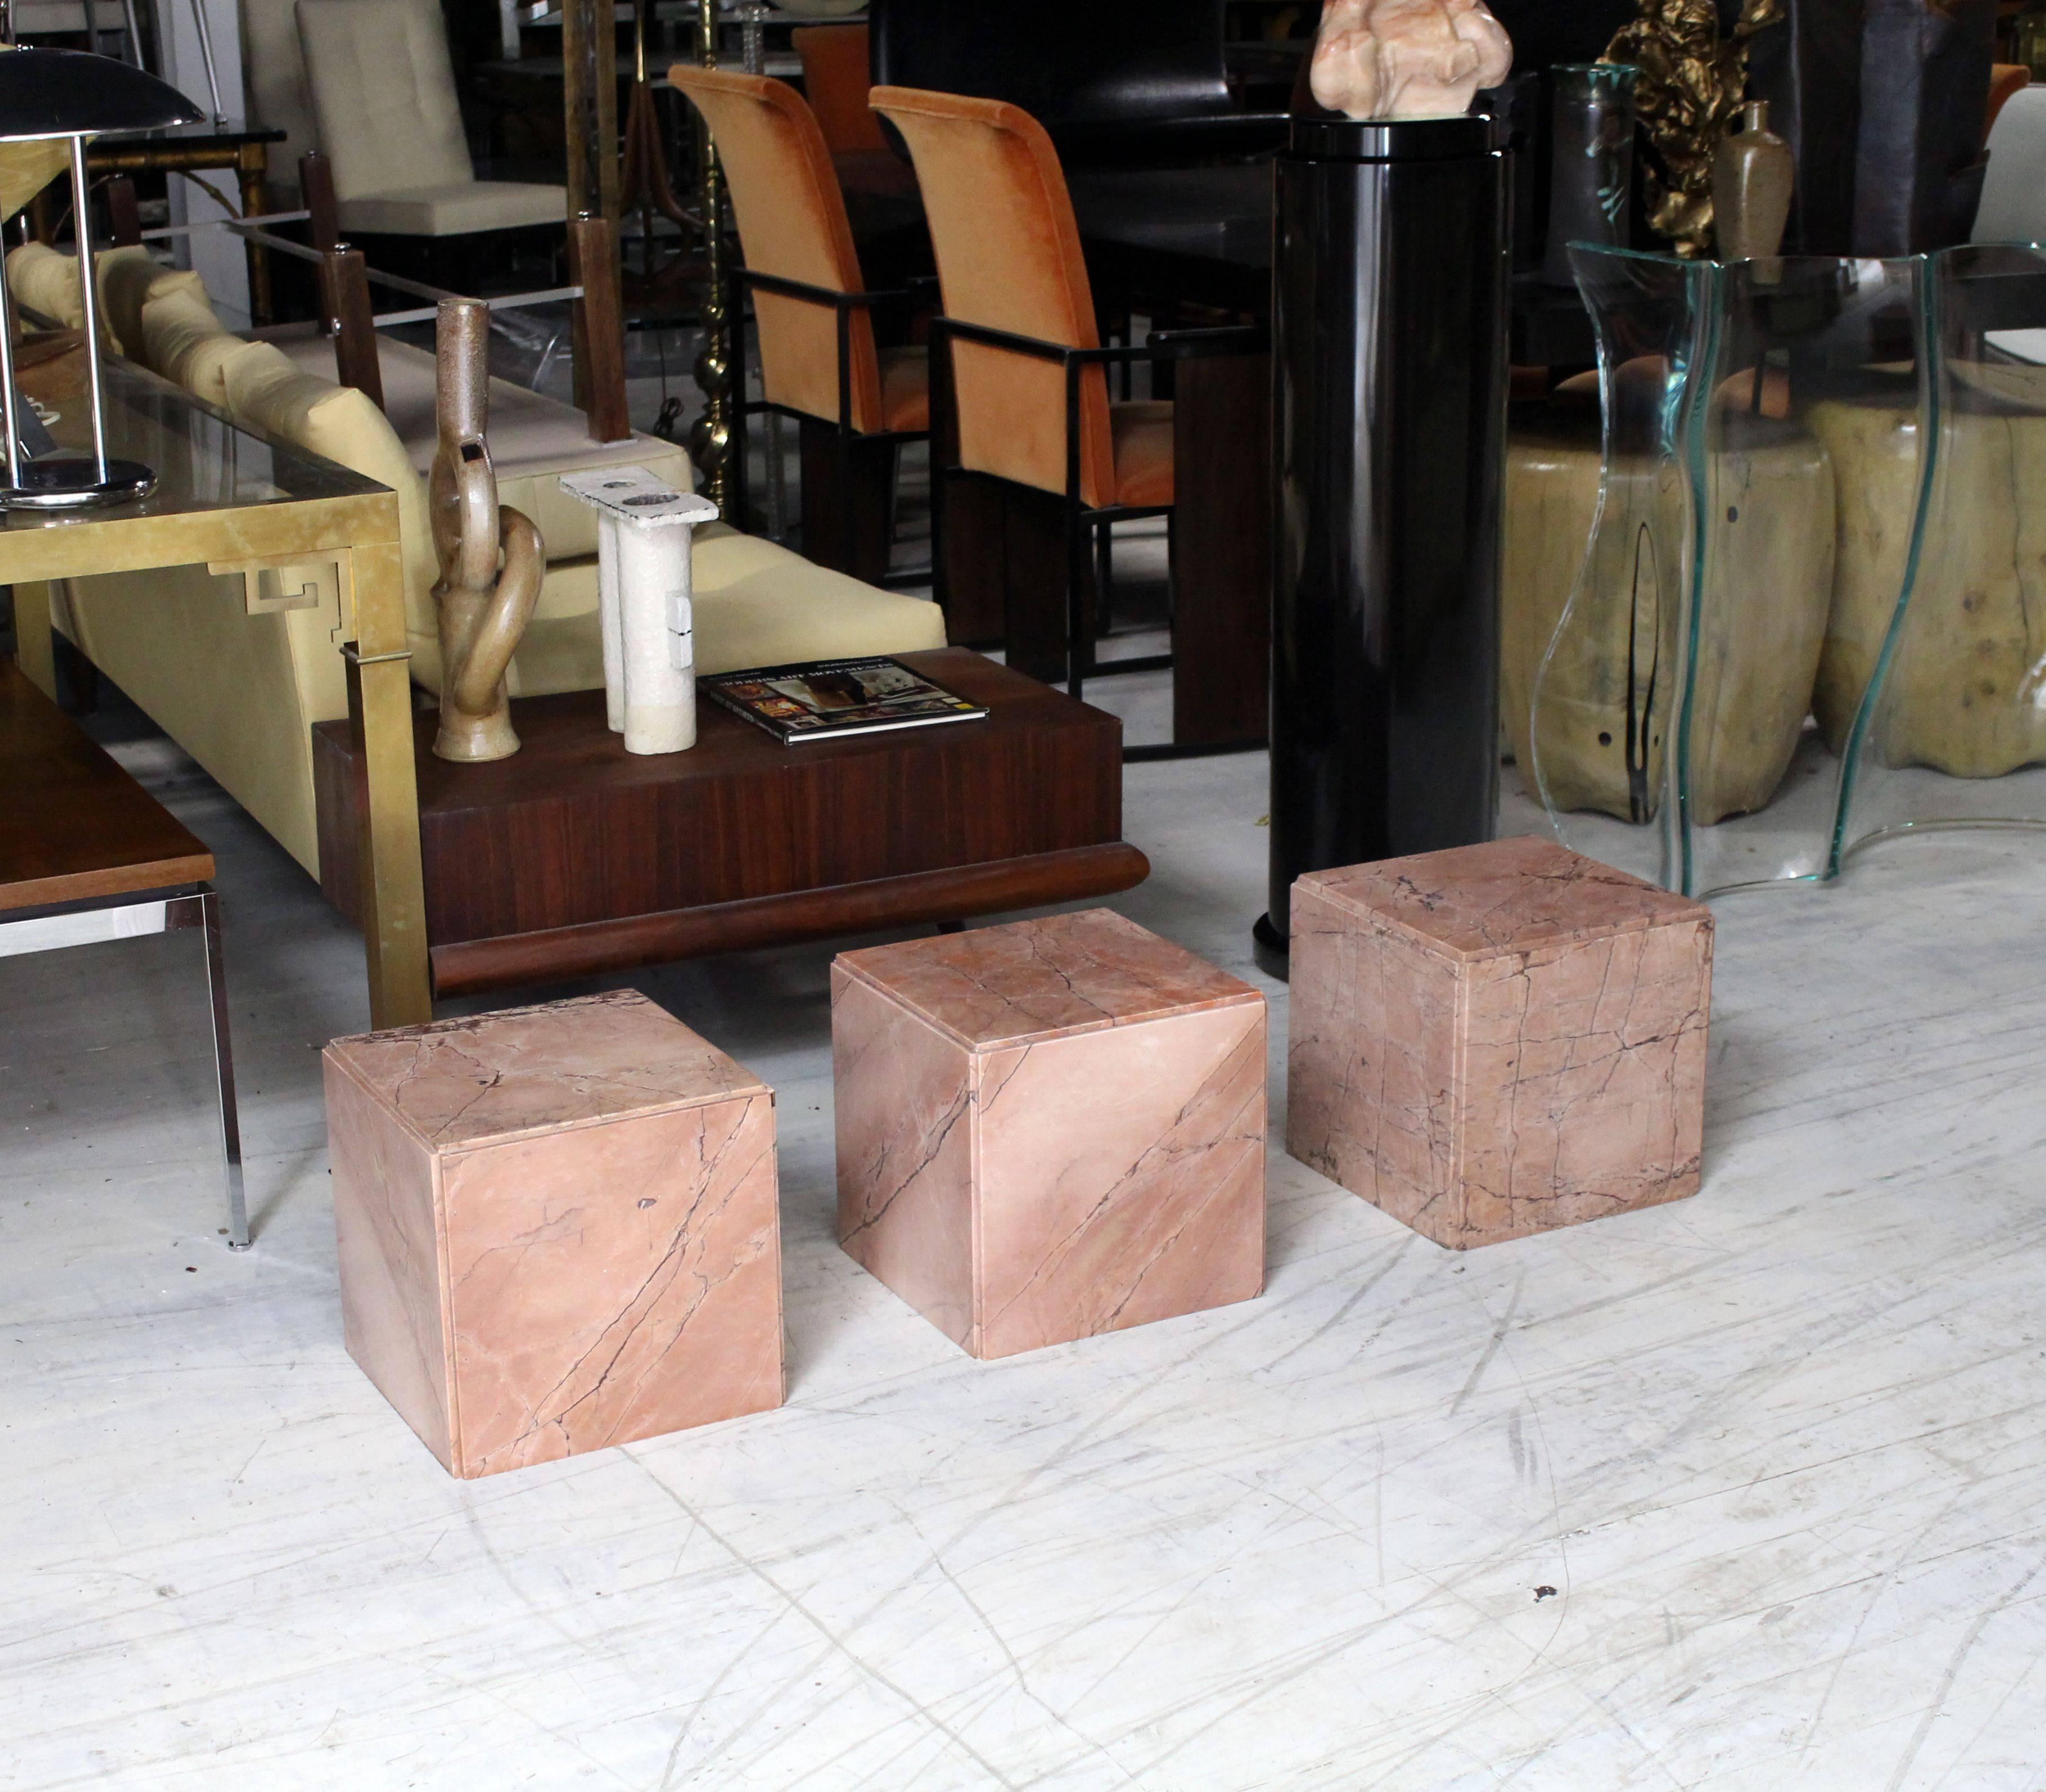 Very nice set of three marble cube tables or pedestals.